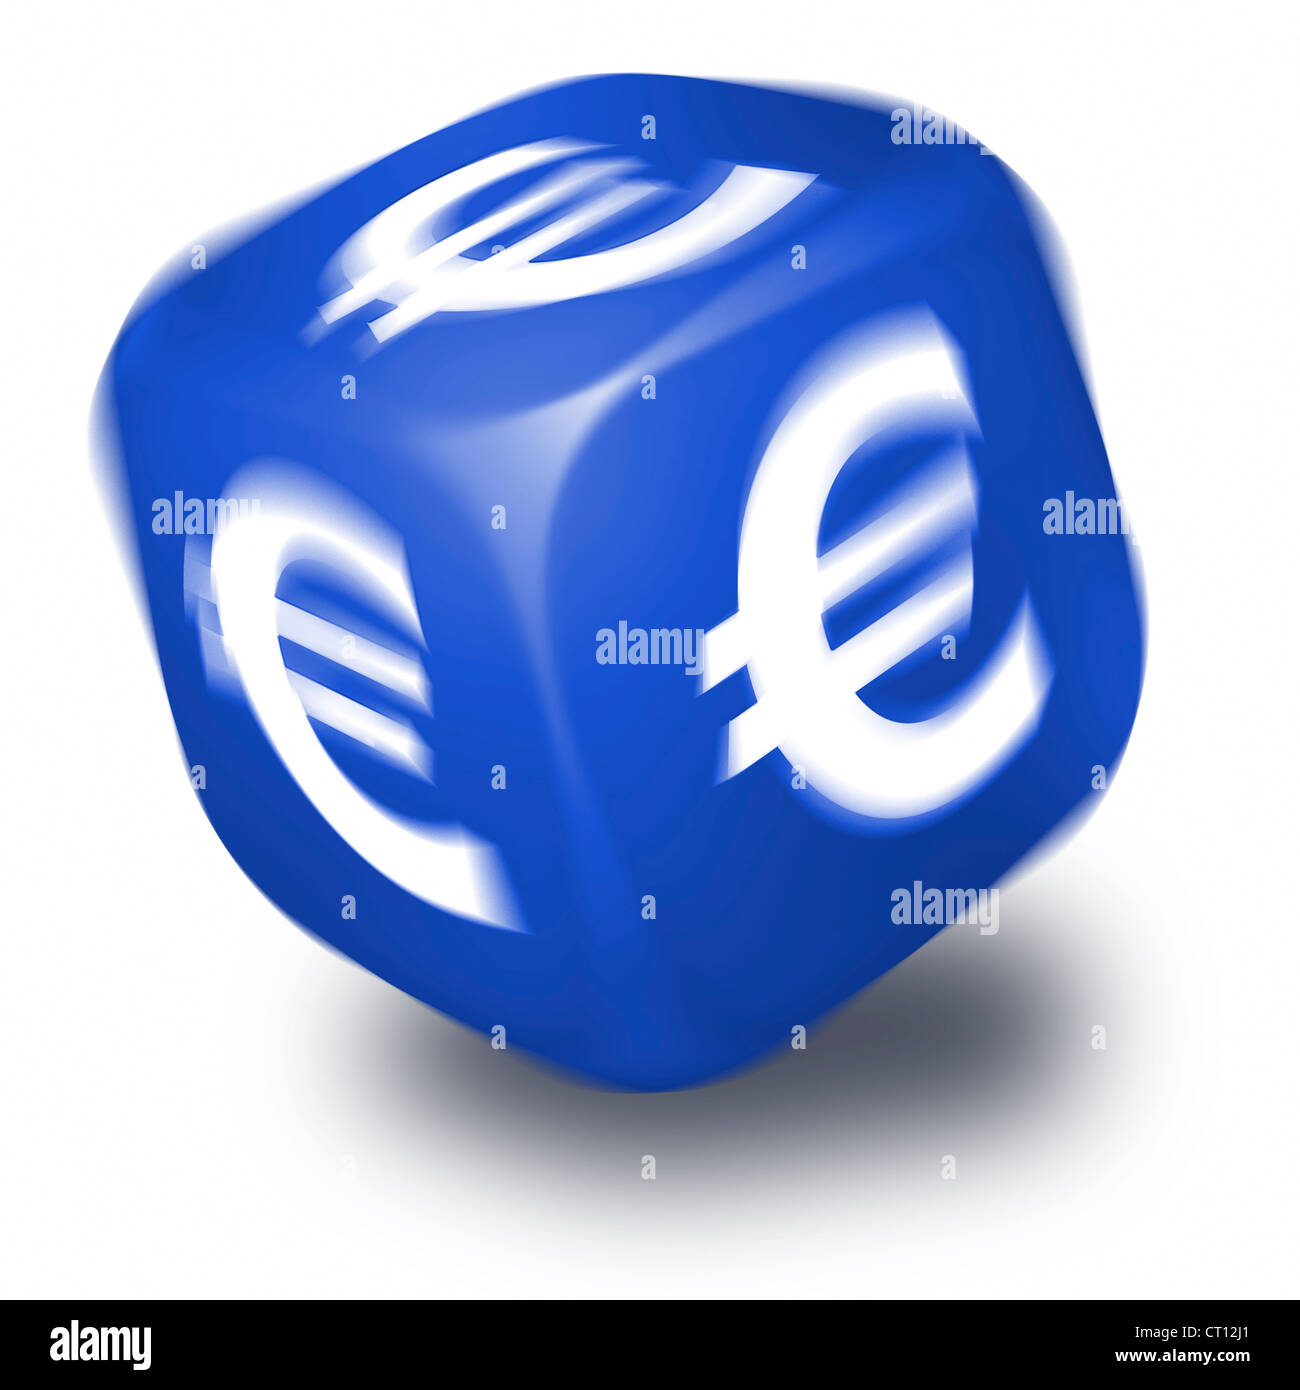 Spinning blue dice with the Euro symbol printed on each face Stock Photo